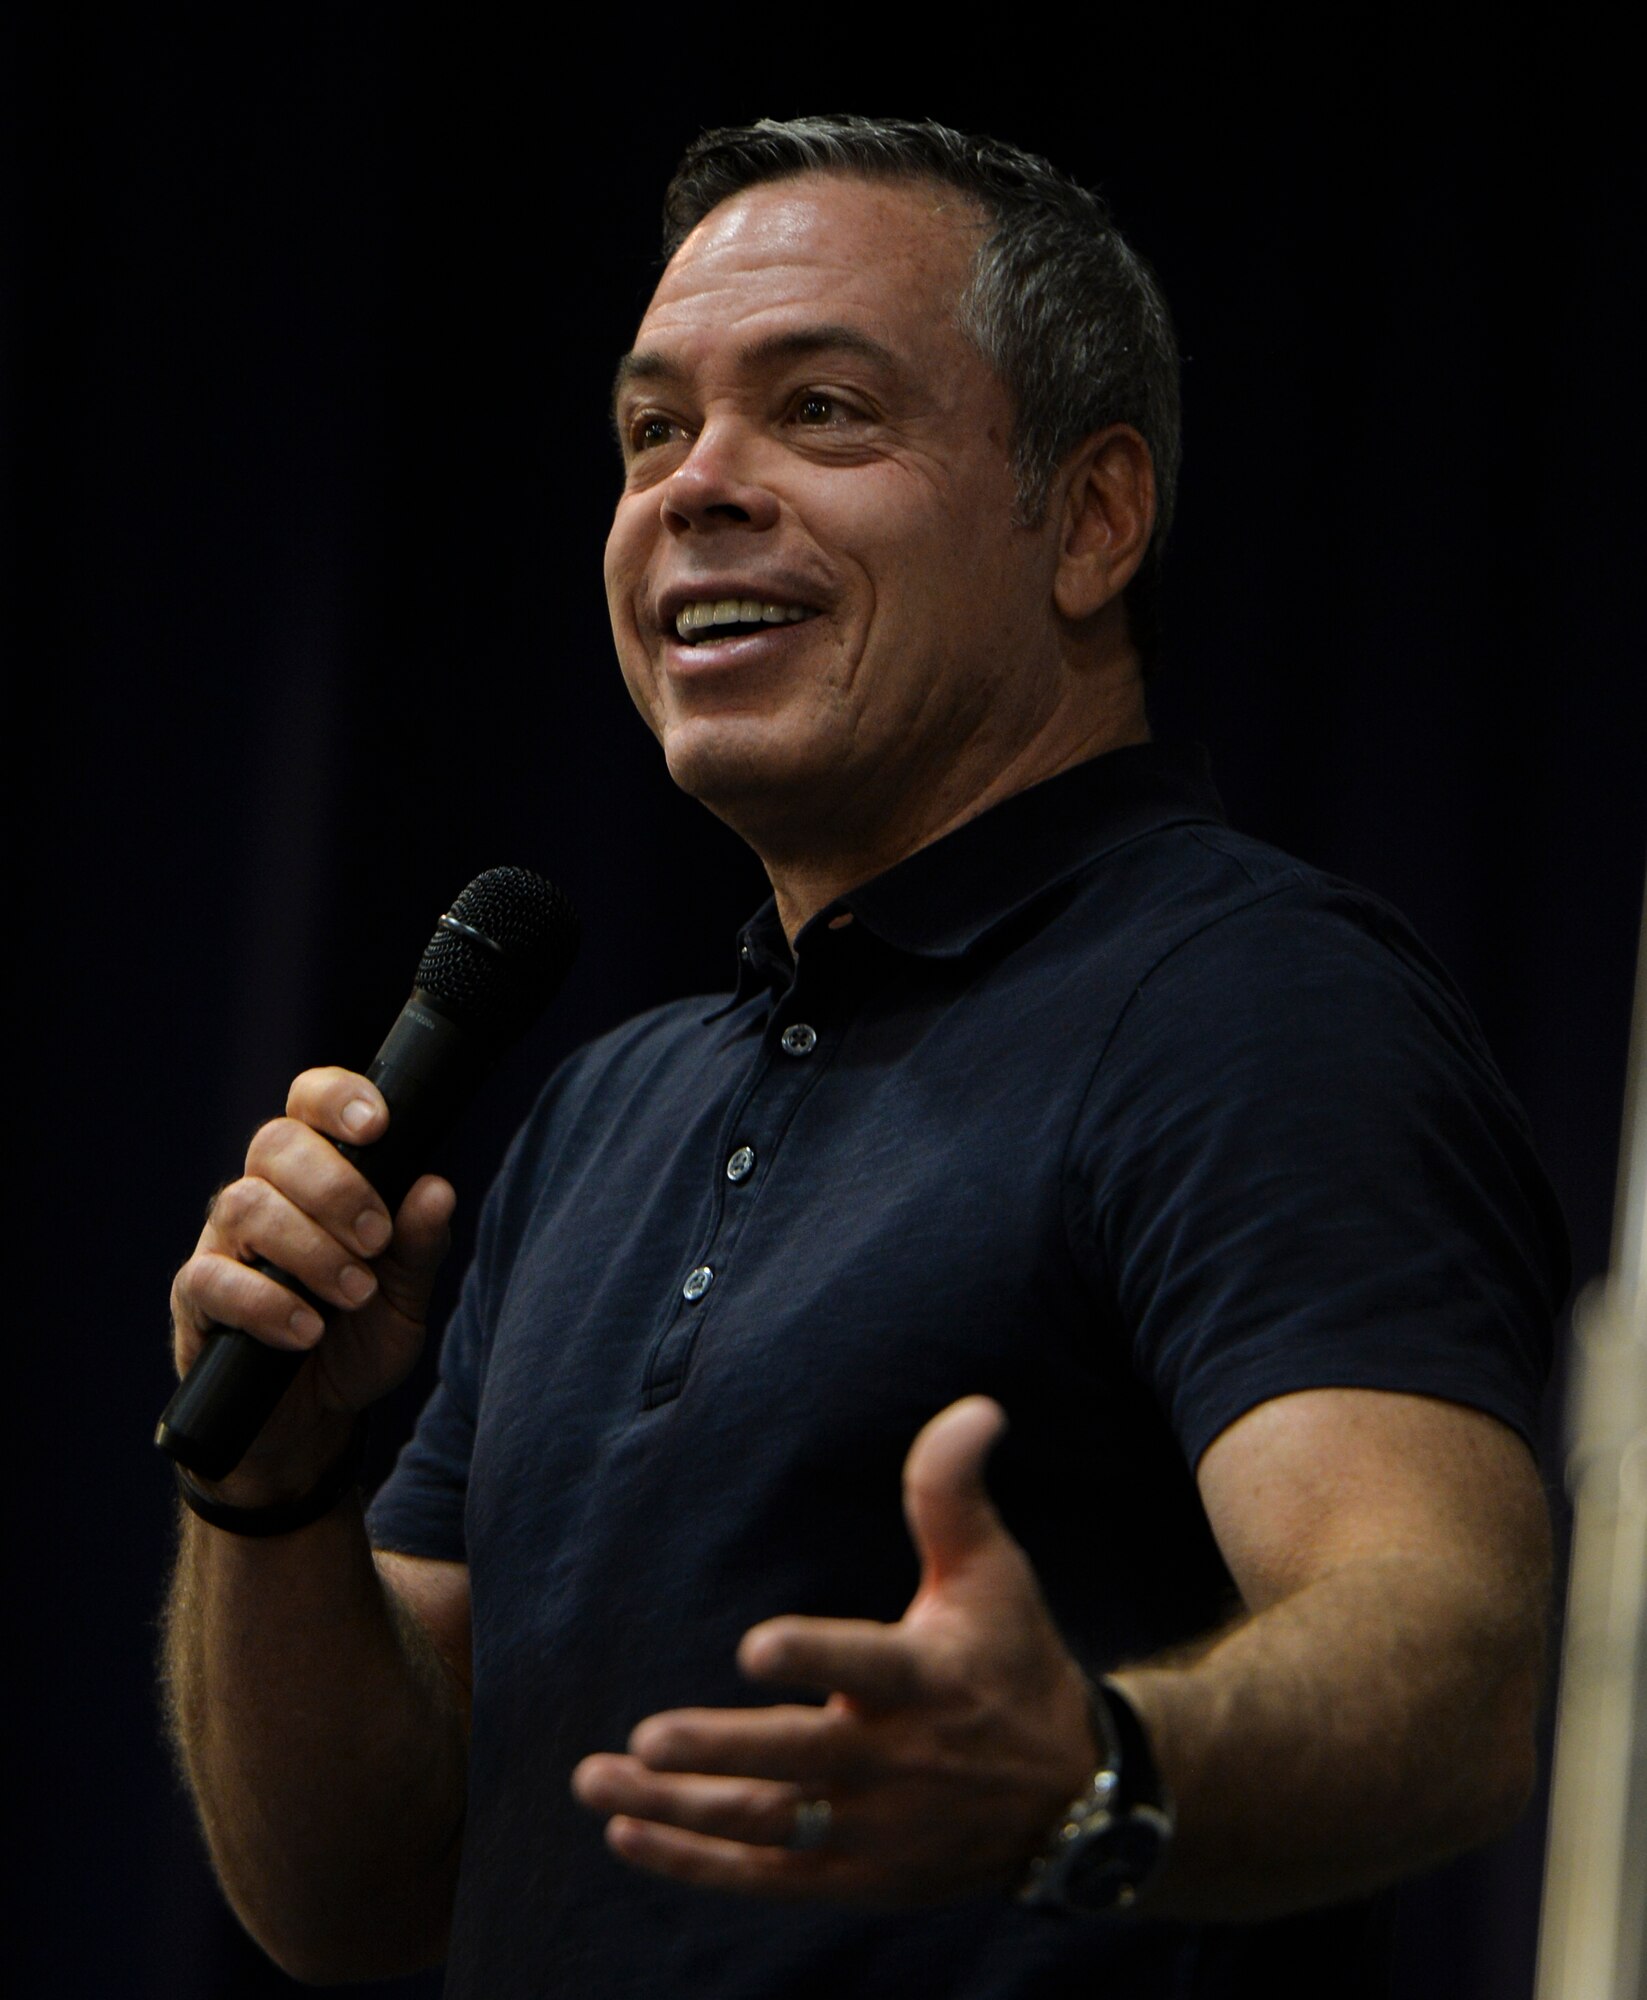 Comedian Bernie McGrenahan speaks to Airmen during resiliency training at King Auditorium, Hurlburt Field, Fla., Sept. 24, 2014. The training focused on the importance of resiliency in a humor filled presentation. (U.S. Air Force photo/Senior Airman Christopher Callaway)  